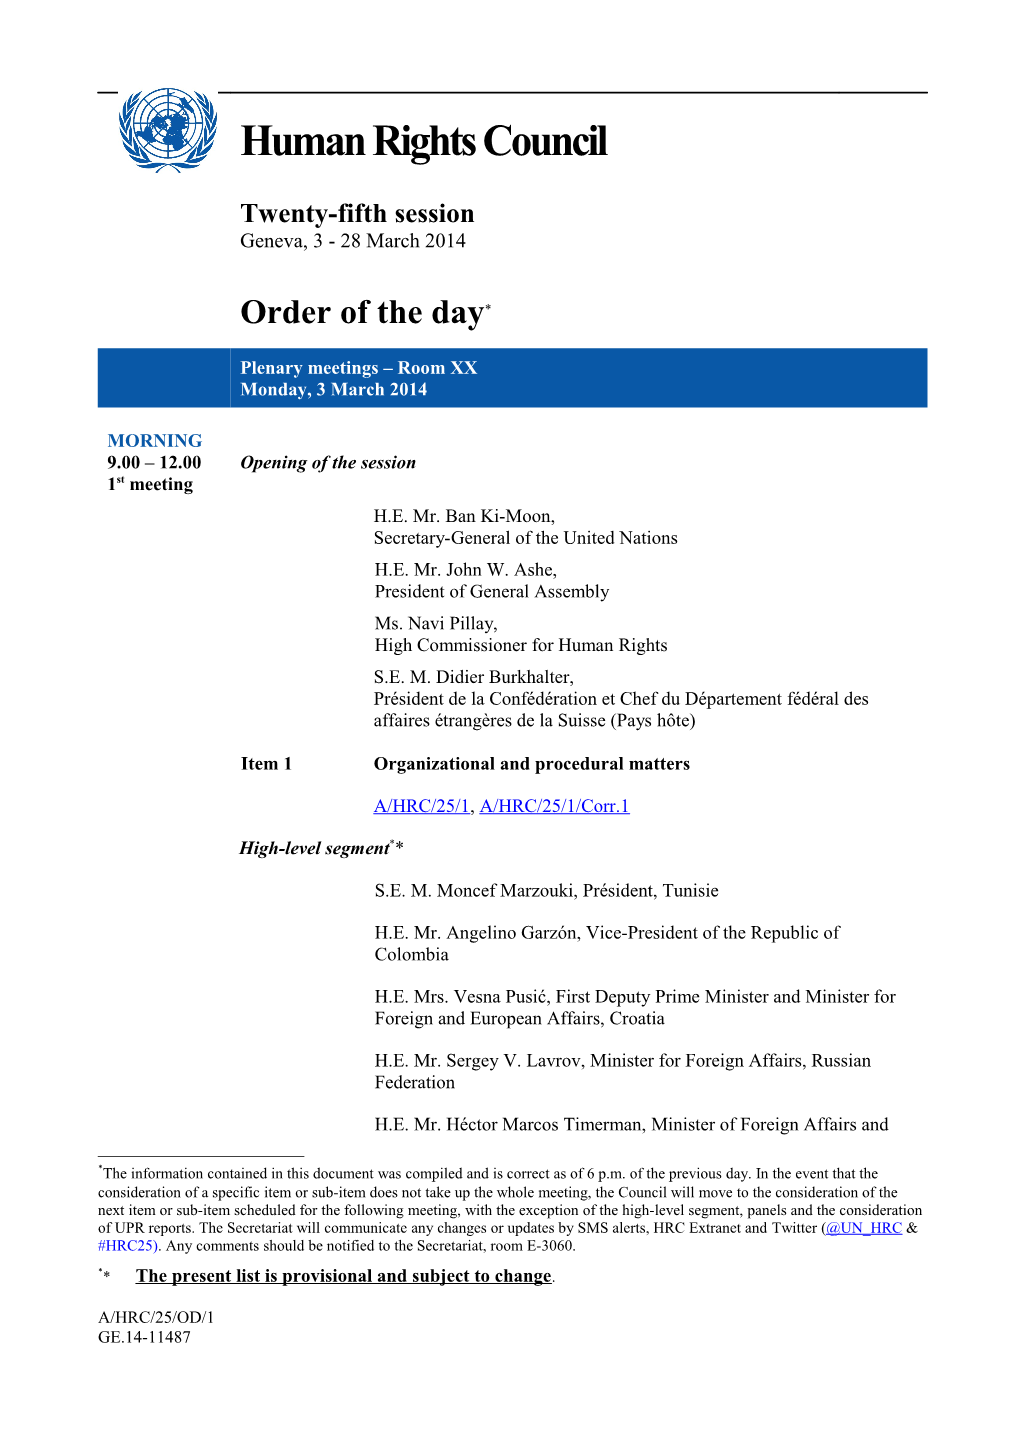 Order of the Day, Monday 3 March 2014 in English (Word)